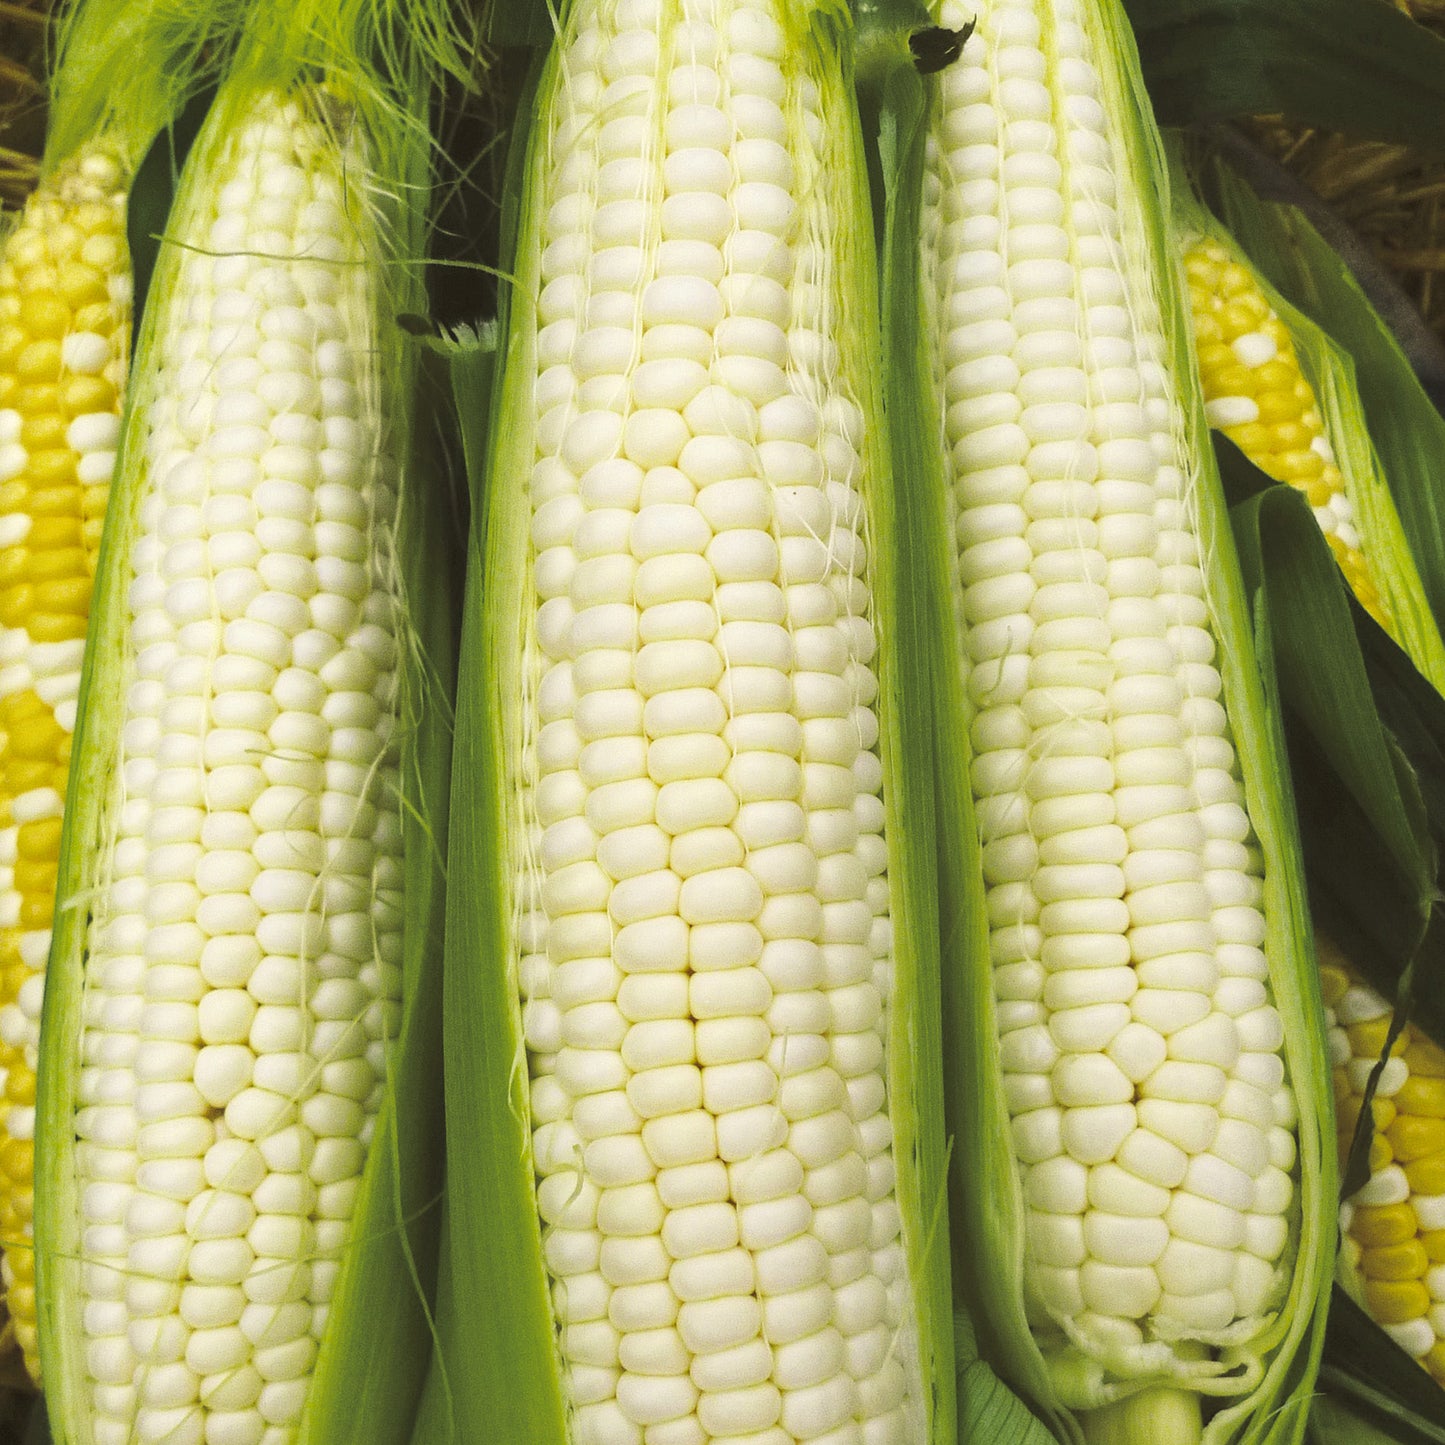 Hybrid Silver Queen Sweet Corn seeds fully matured and harvested, a close-up of an open husk.